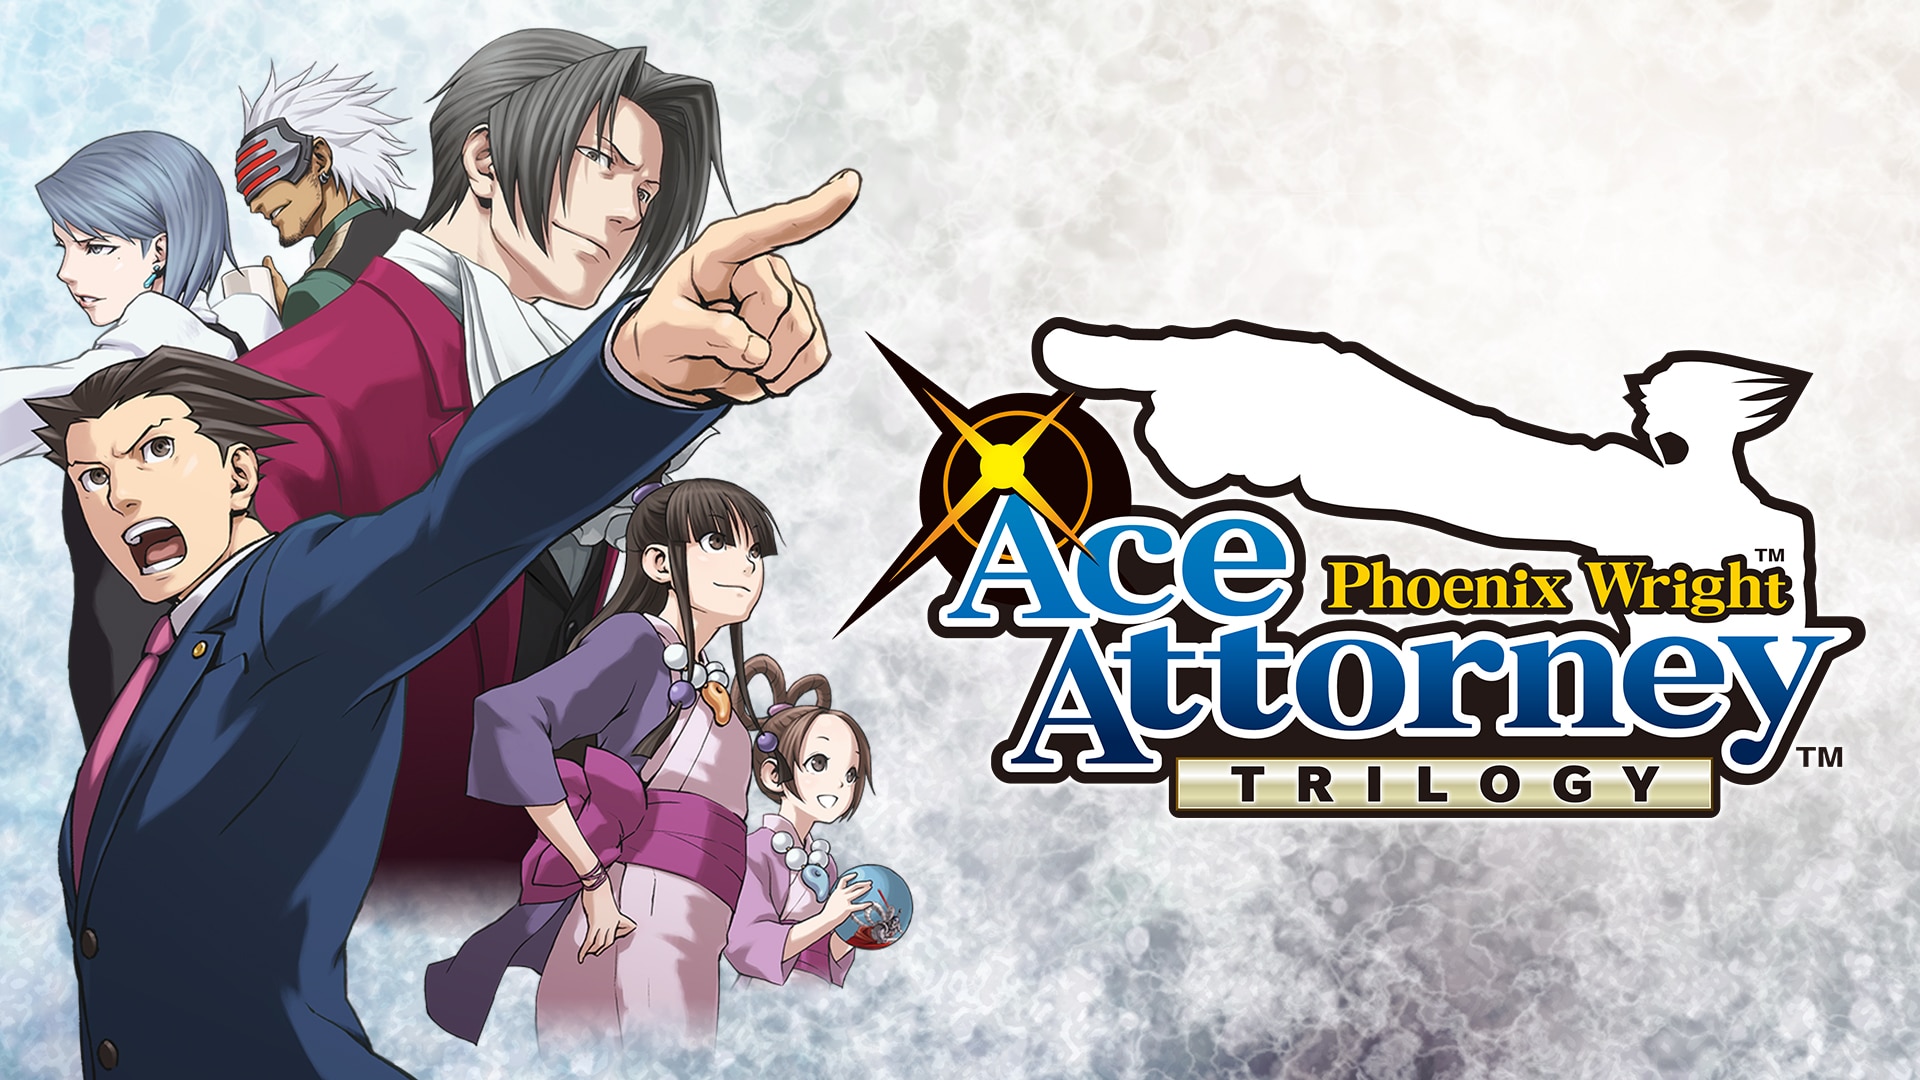 Phoenix Wright: Ace Attorney Trilogy Joining Game Pass Next Week